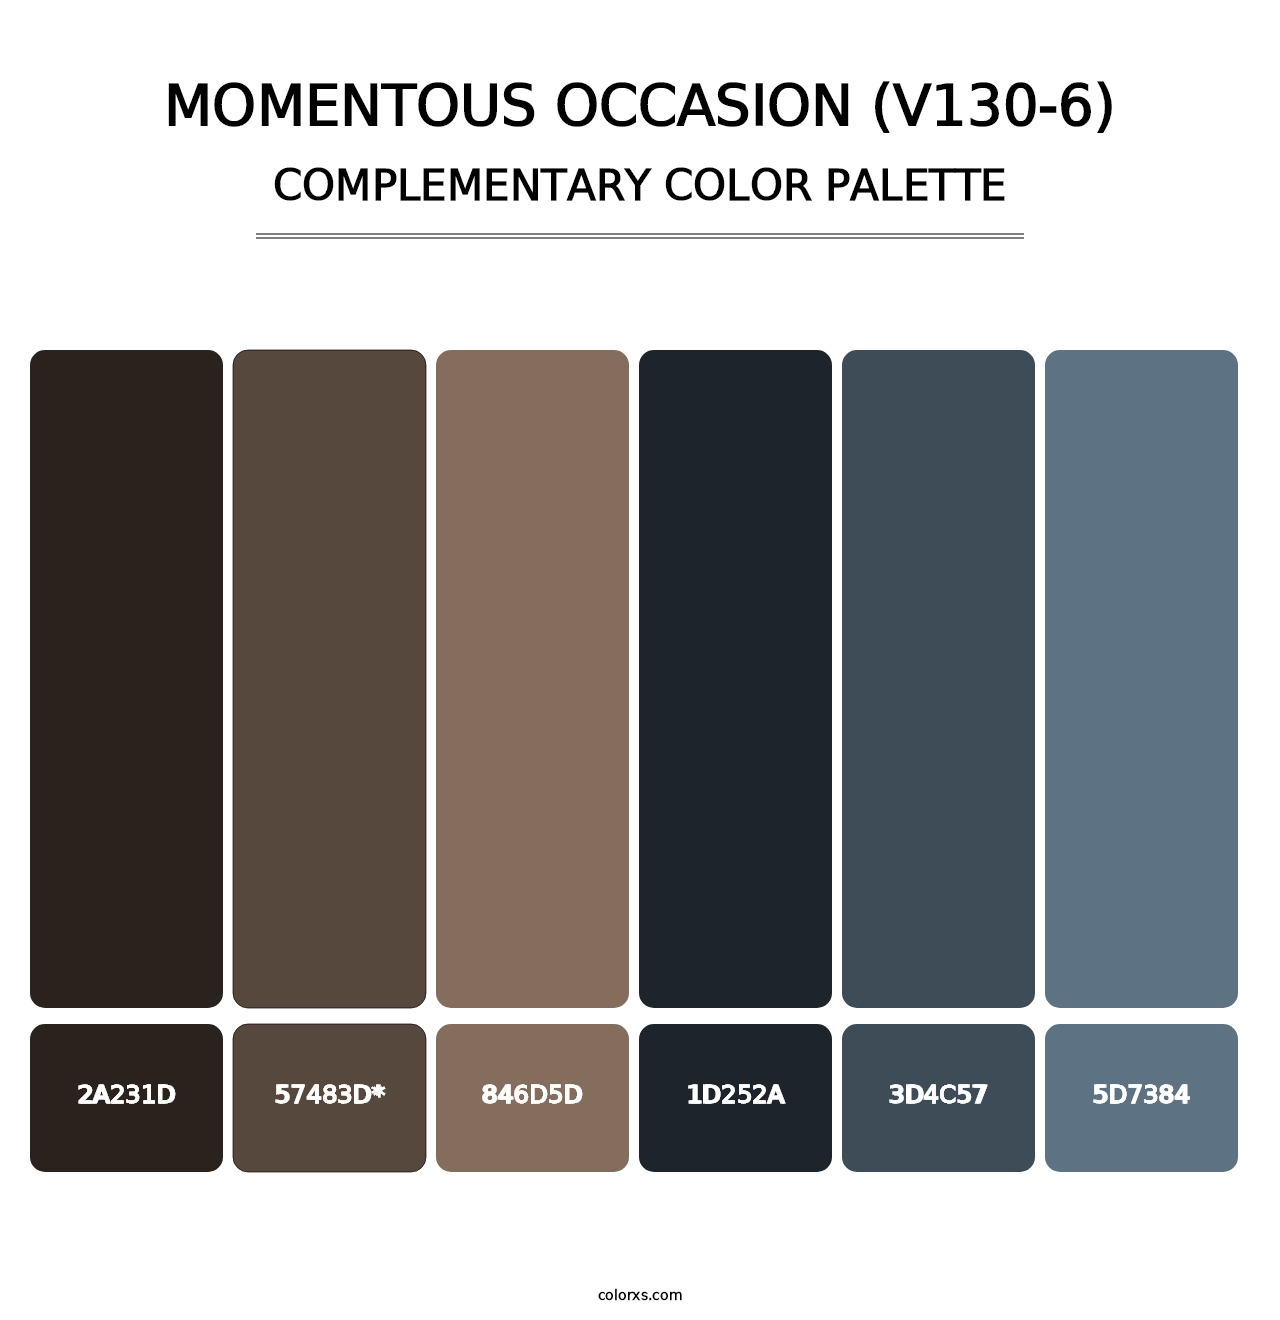 Momentous Occasion (V130-6) - Complementary Color Palette